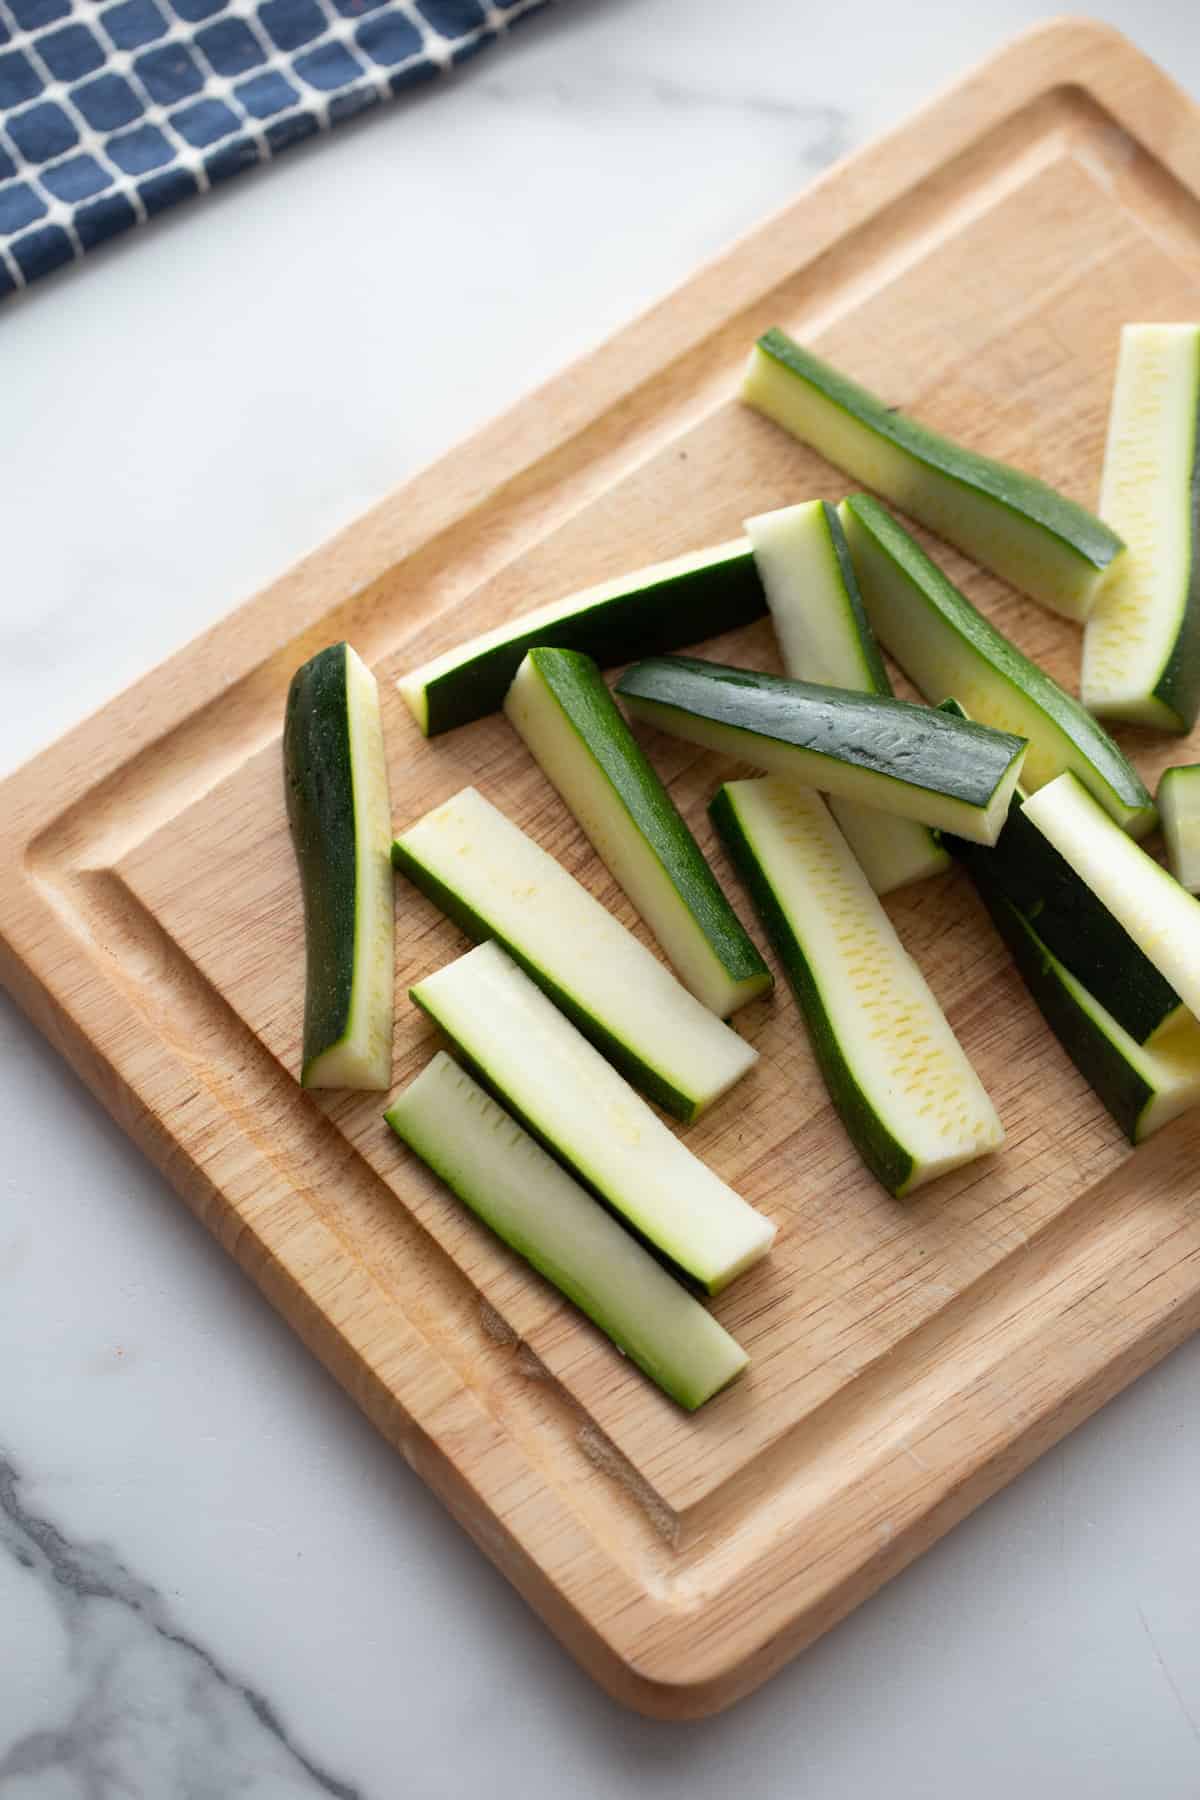 zucchini on a cutting board sliced into matchsticks or fries